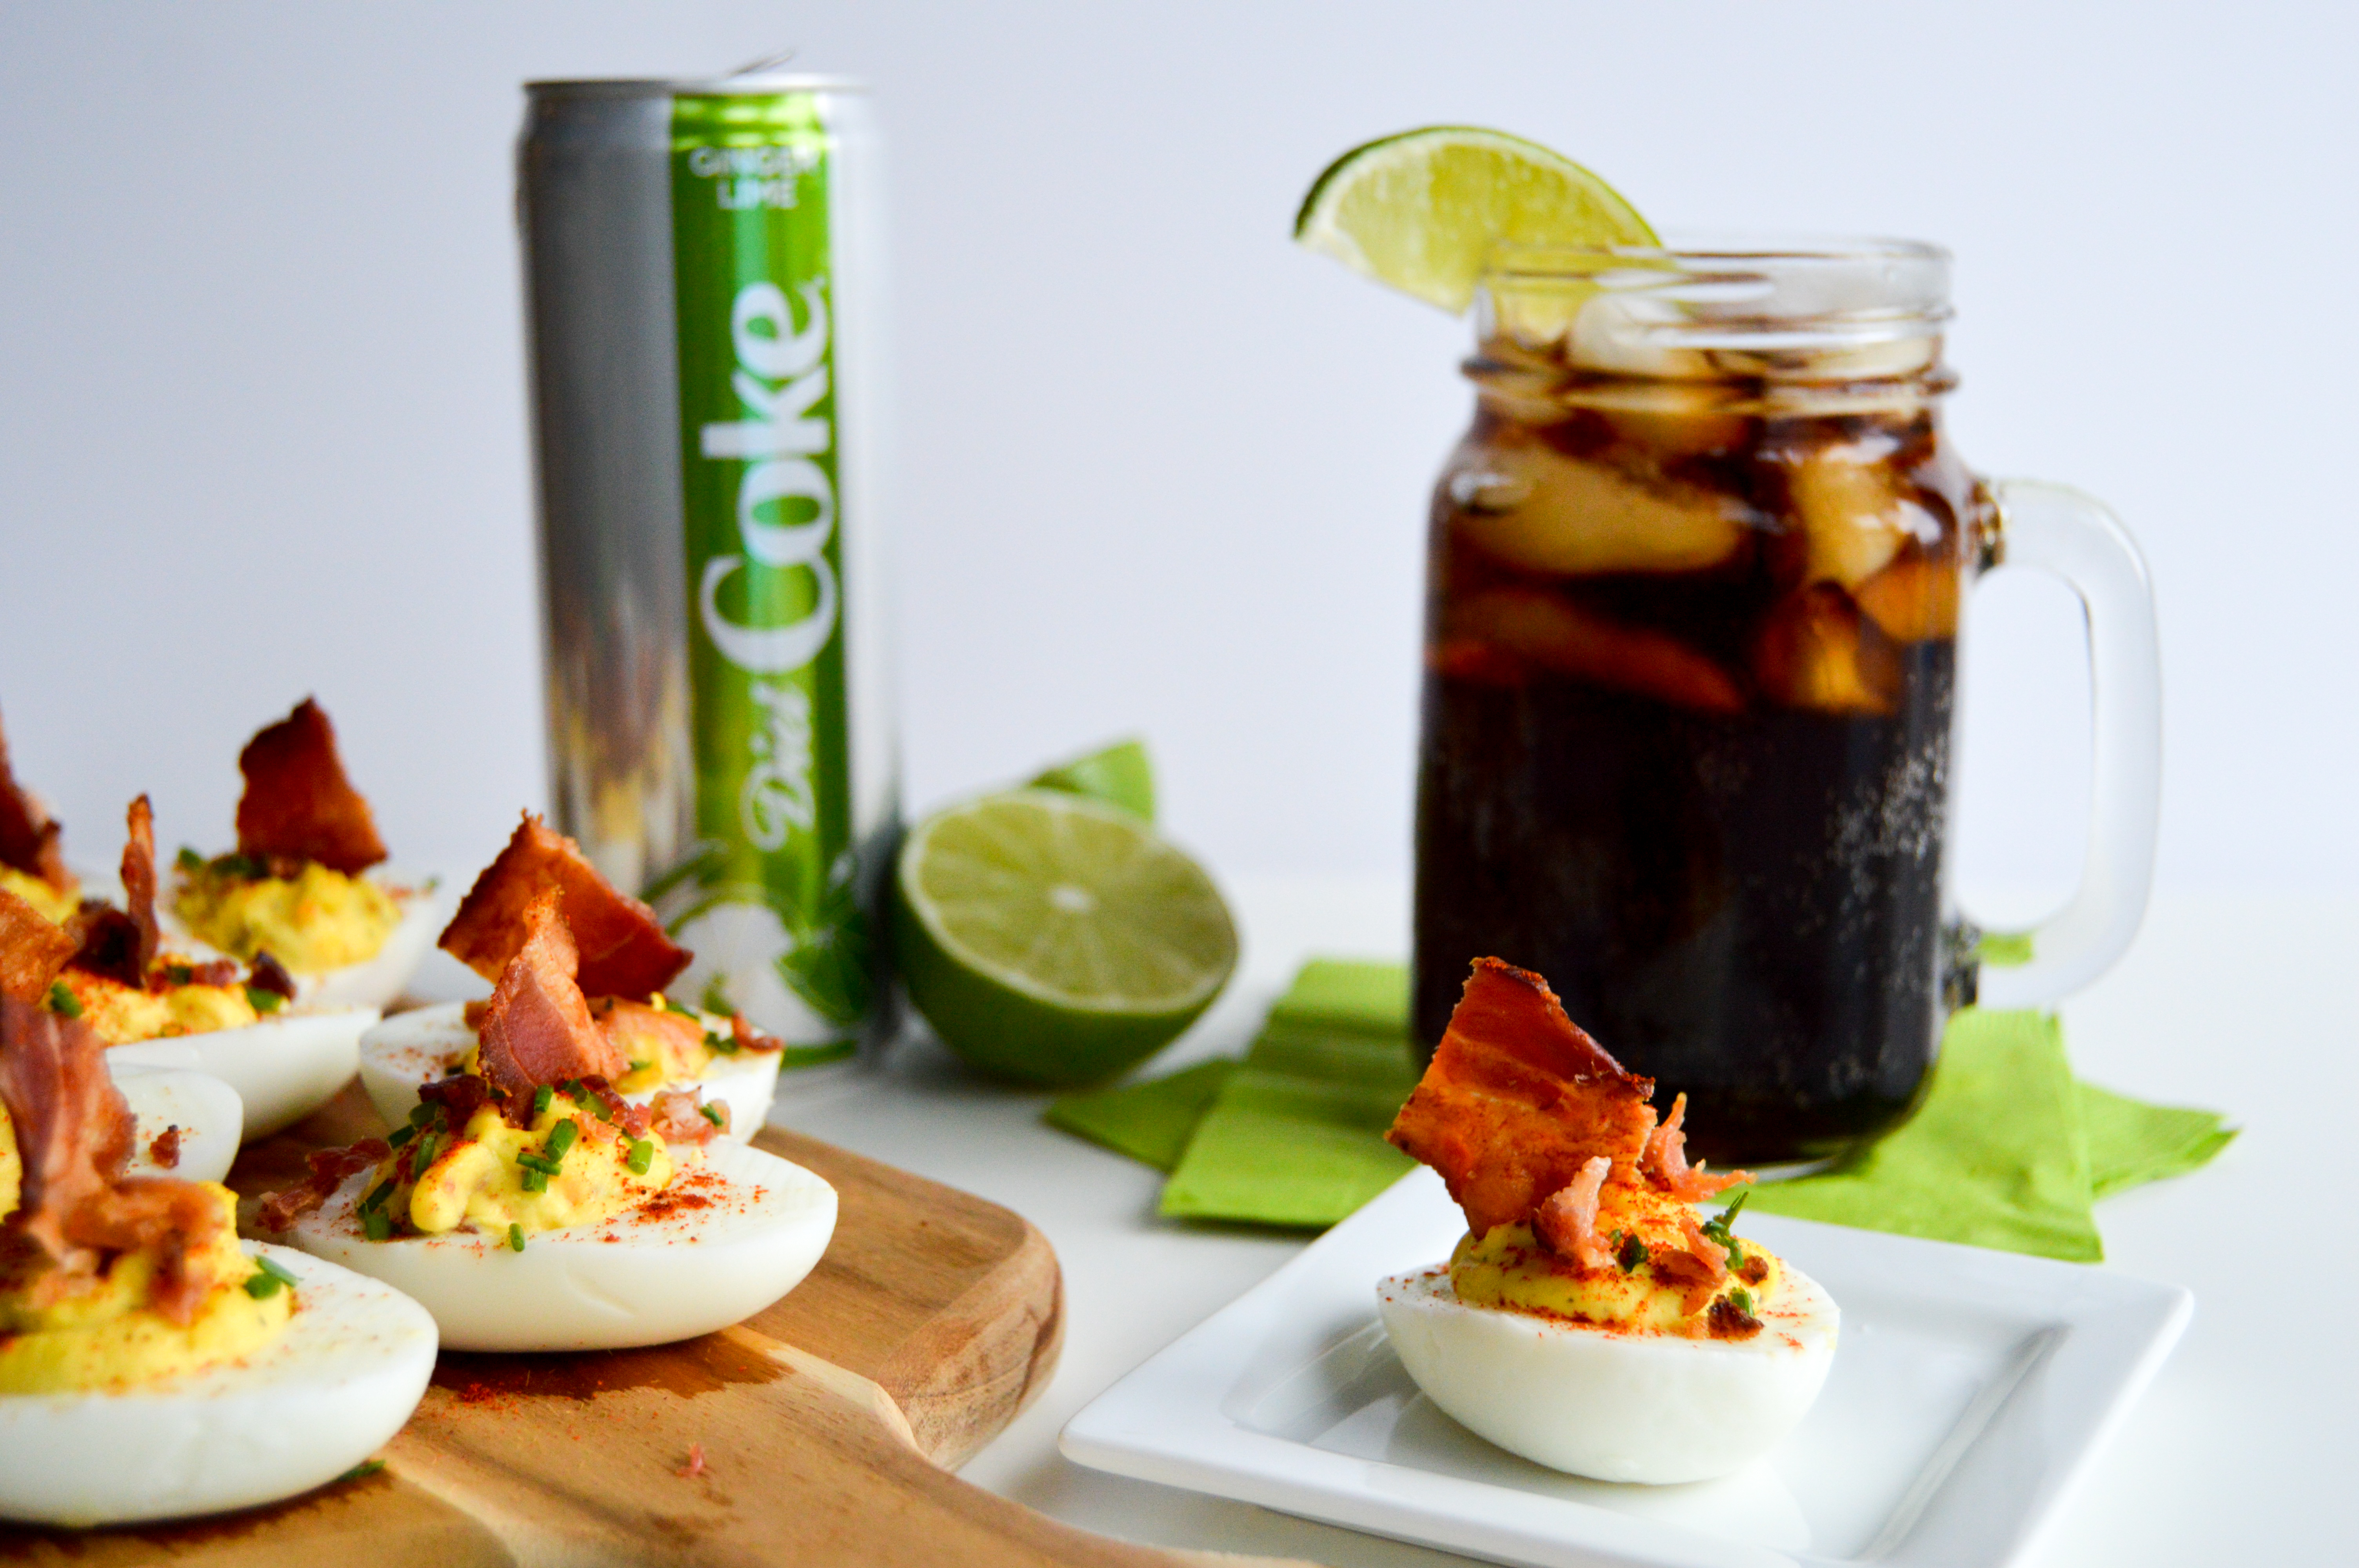 Yummy recipe for bacon loaded deviled eggs to pair with a chilled Diet Coke Ginger Lime. Makes for a bacon bite explosion perfect for your next party!